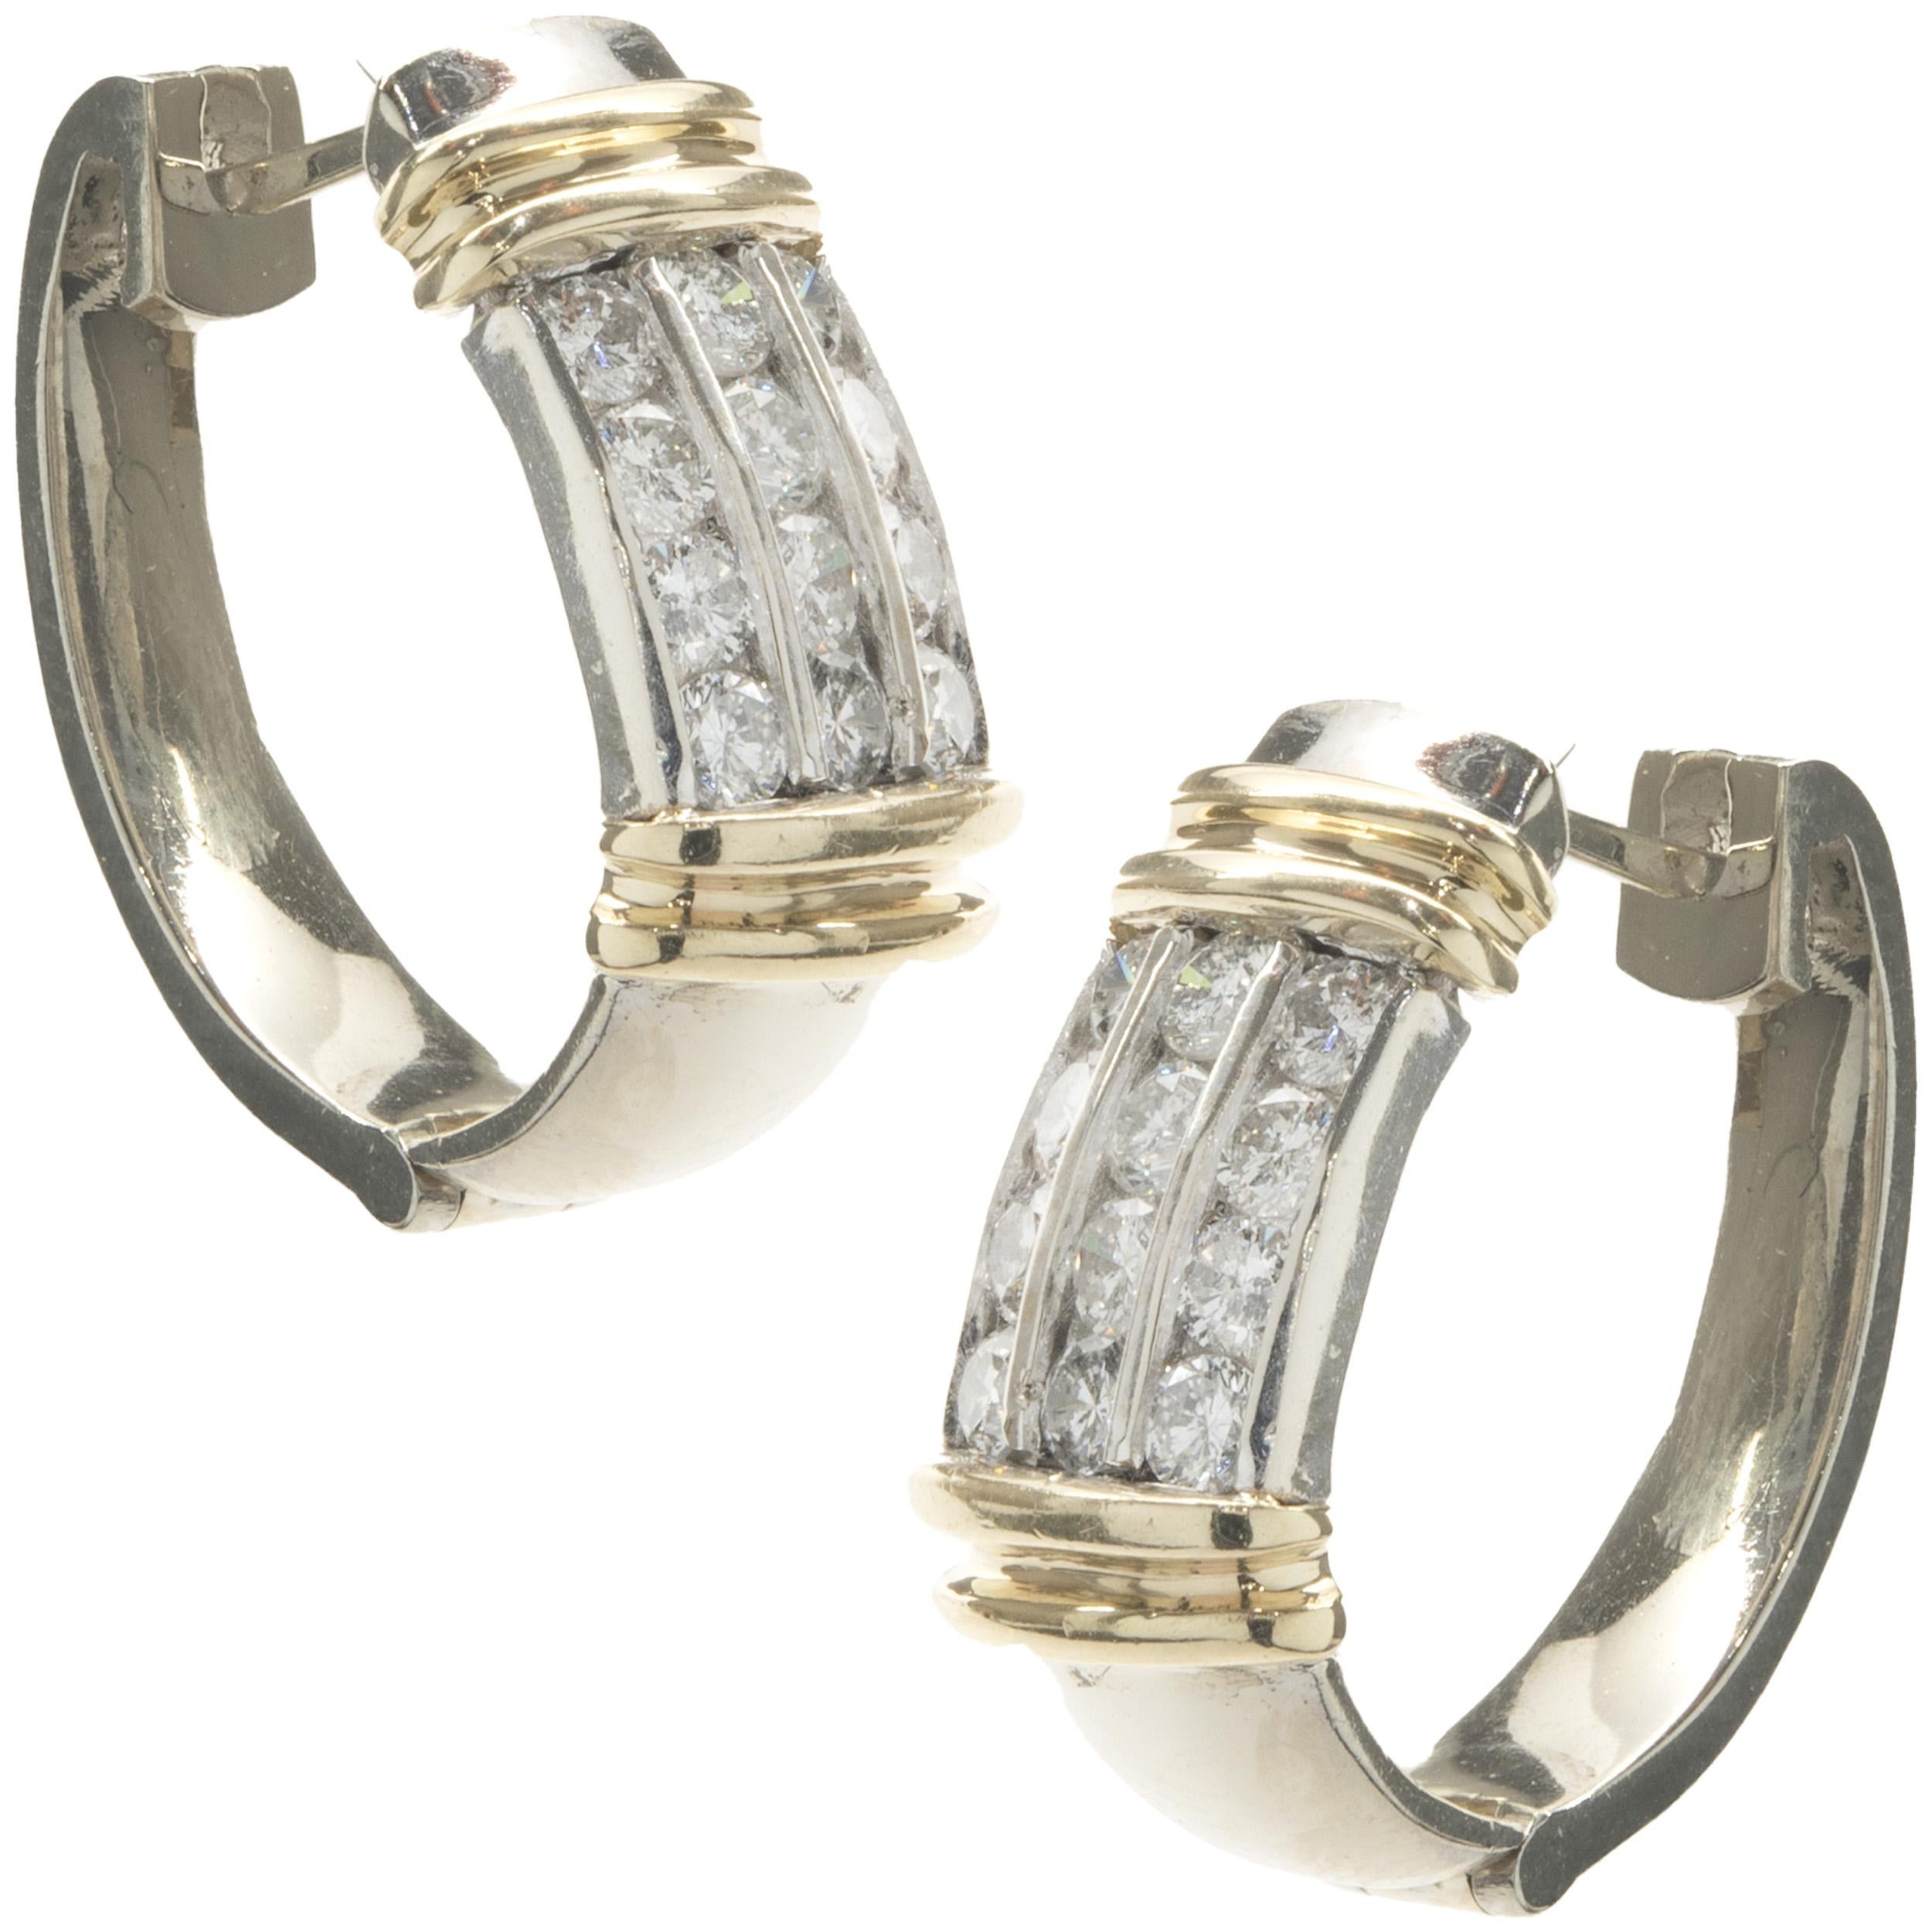 Designer: custom design
Material: 14K white & yellow gold
Diamonds: round brilliant cut = 1.70cttw
Color: G / H
Clarity: SI1-2
Dimensions: earrings measure 20.5mm long
Weight: 14.70 grams